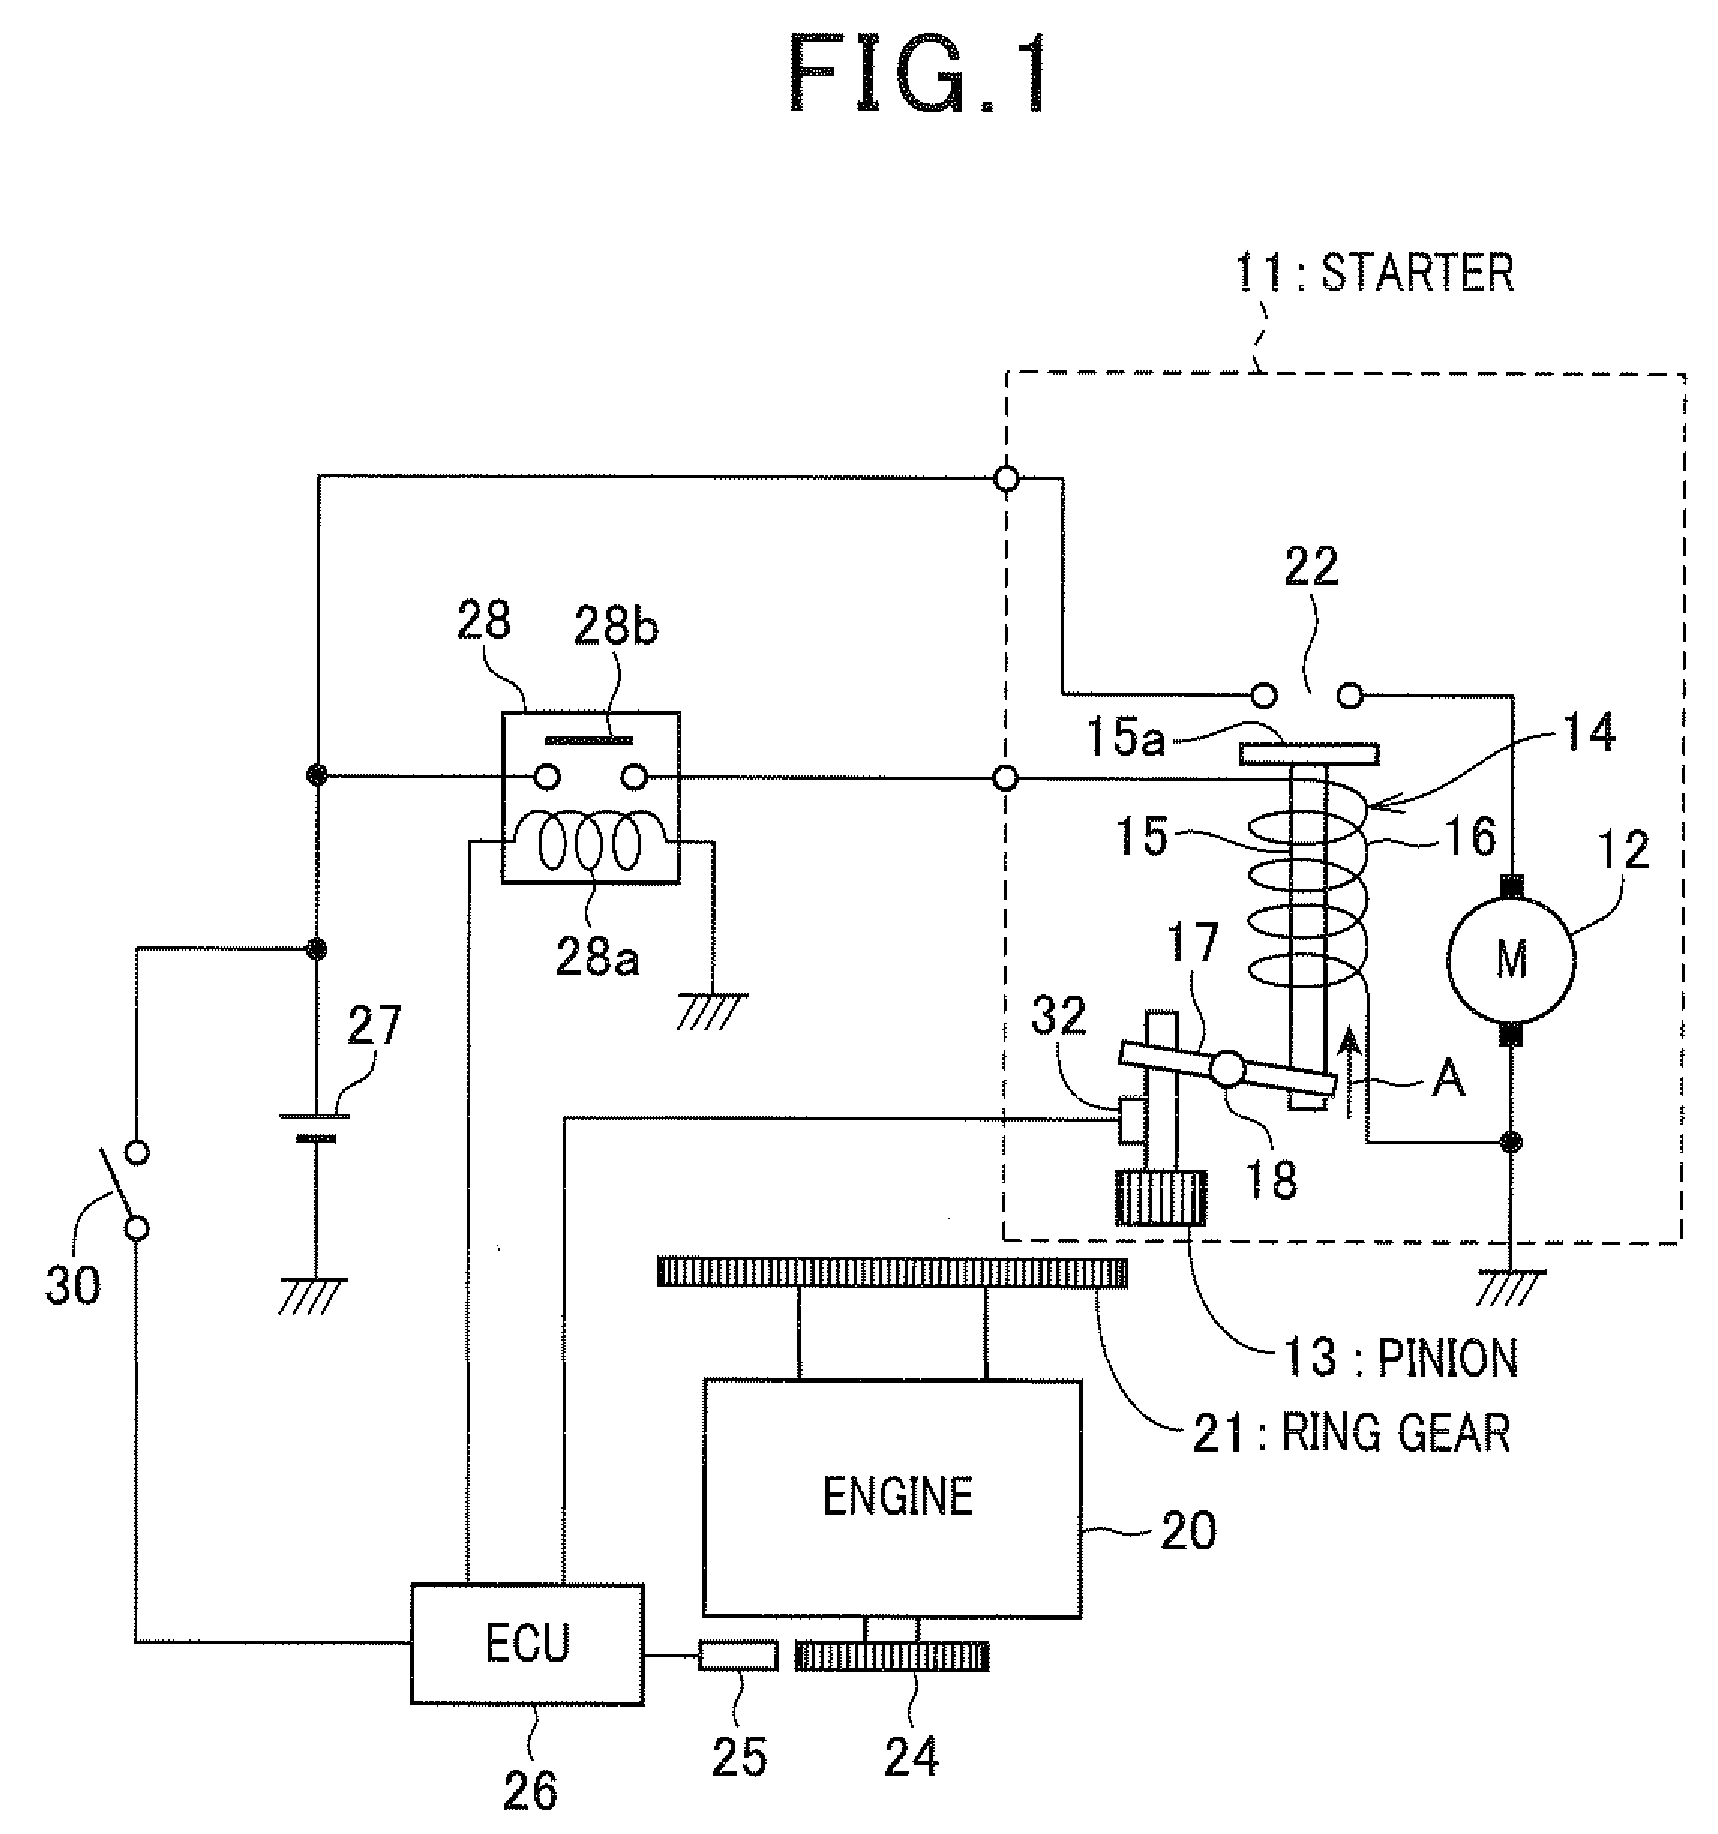 Control apparatus for controlling on-vehicle starter for starting engine